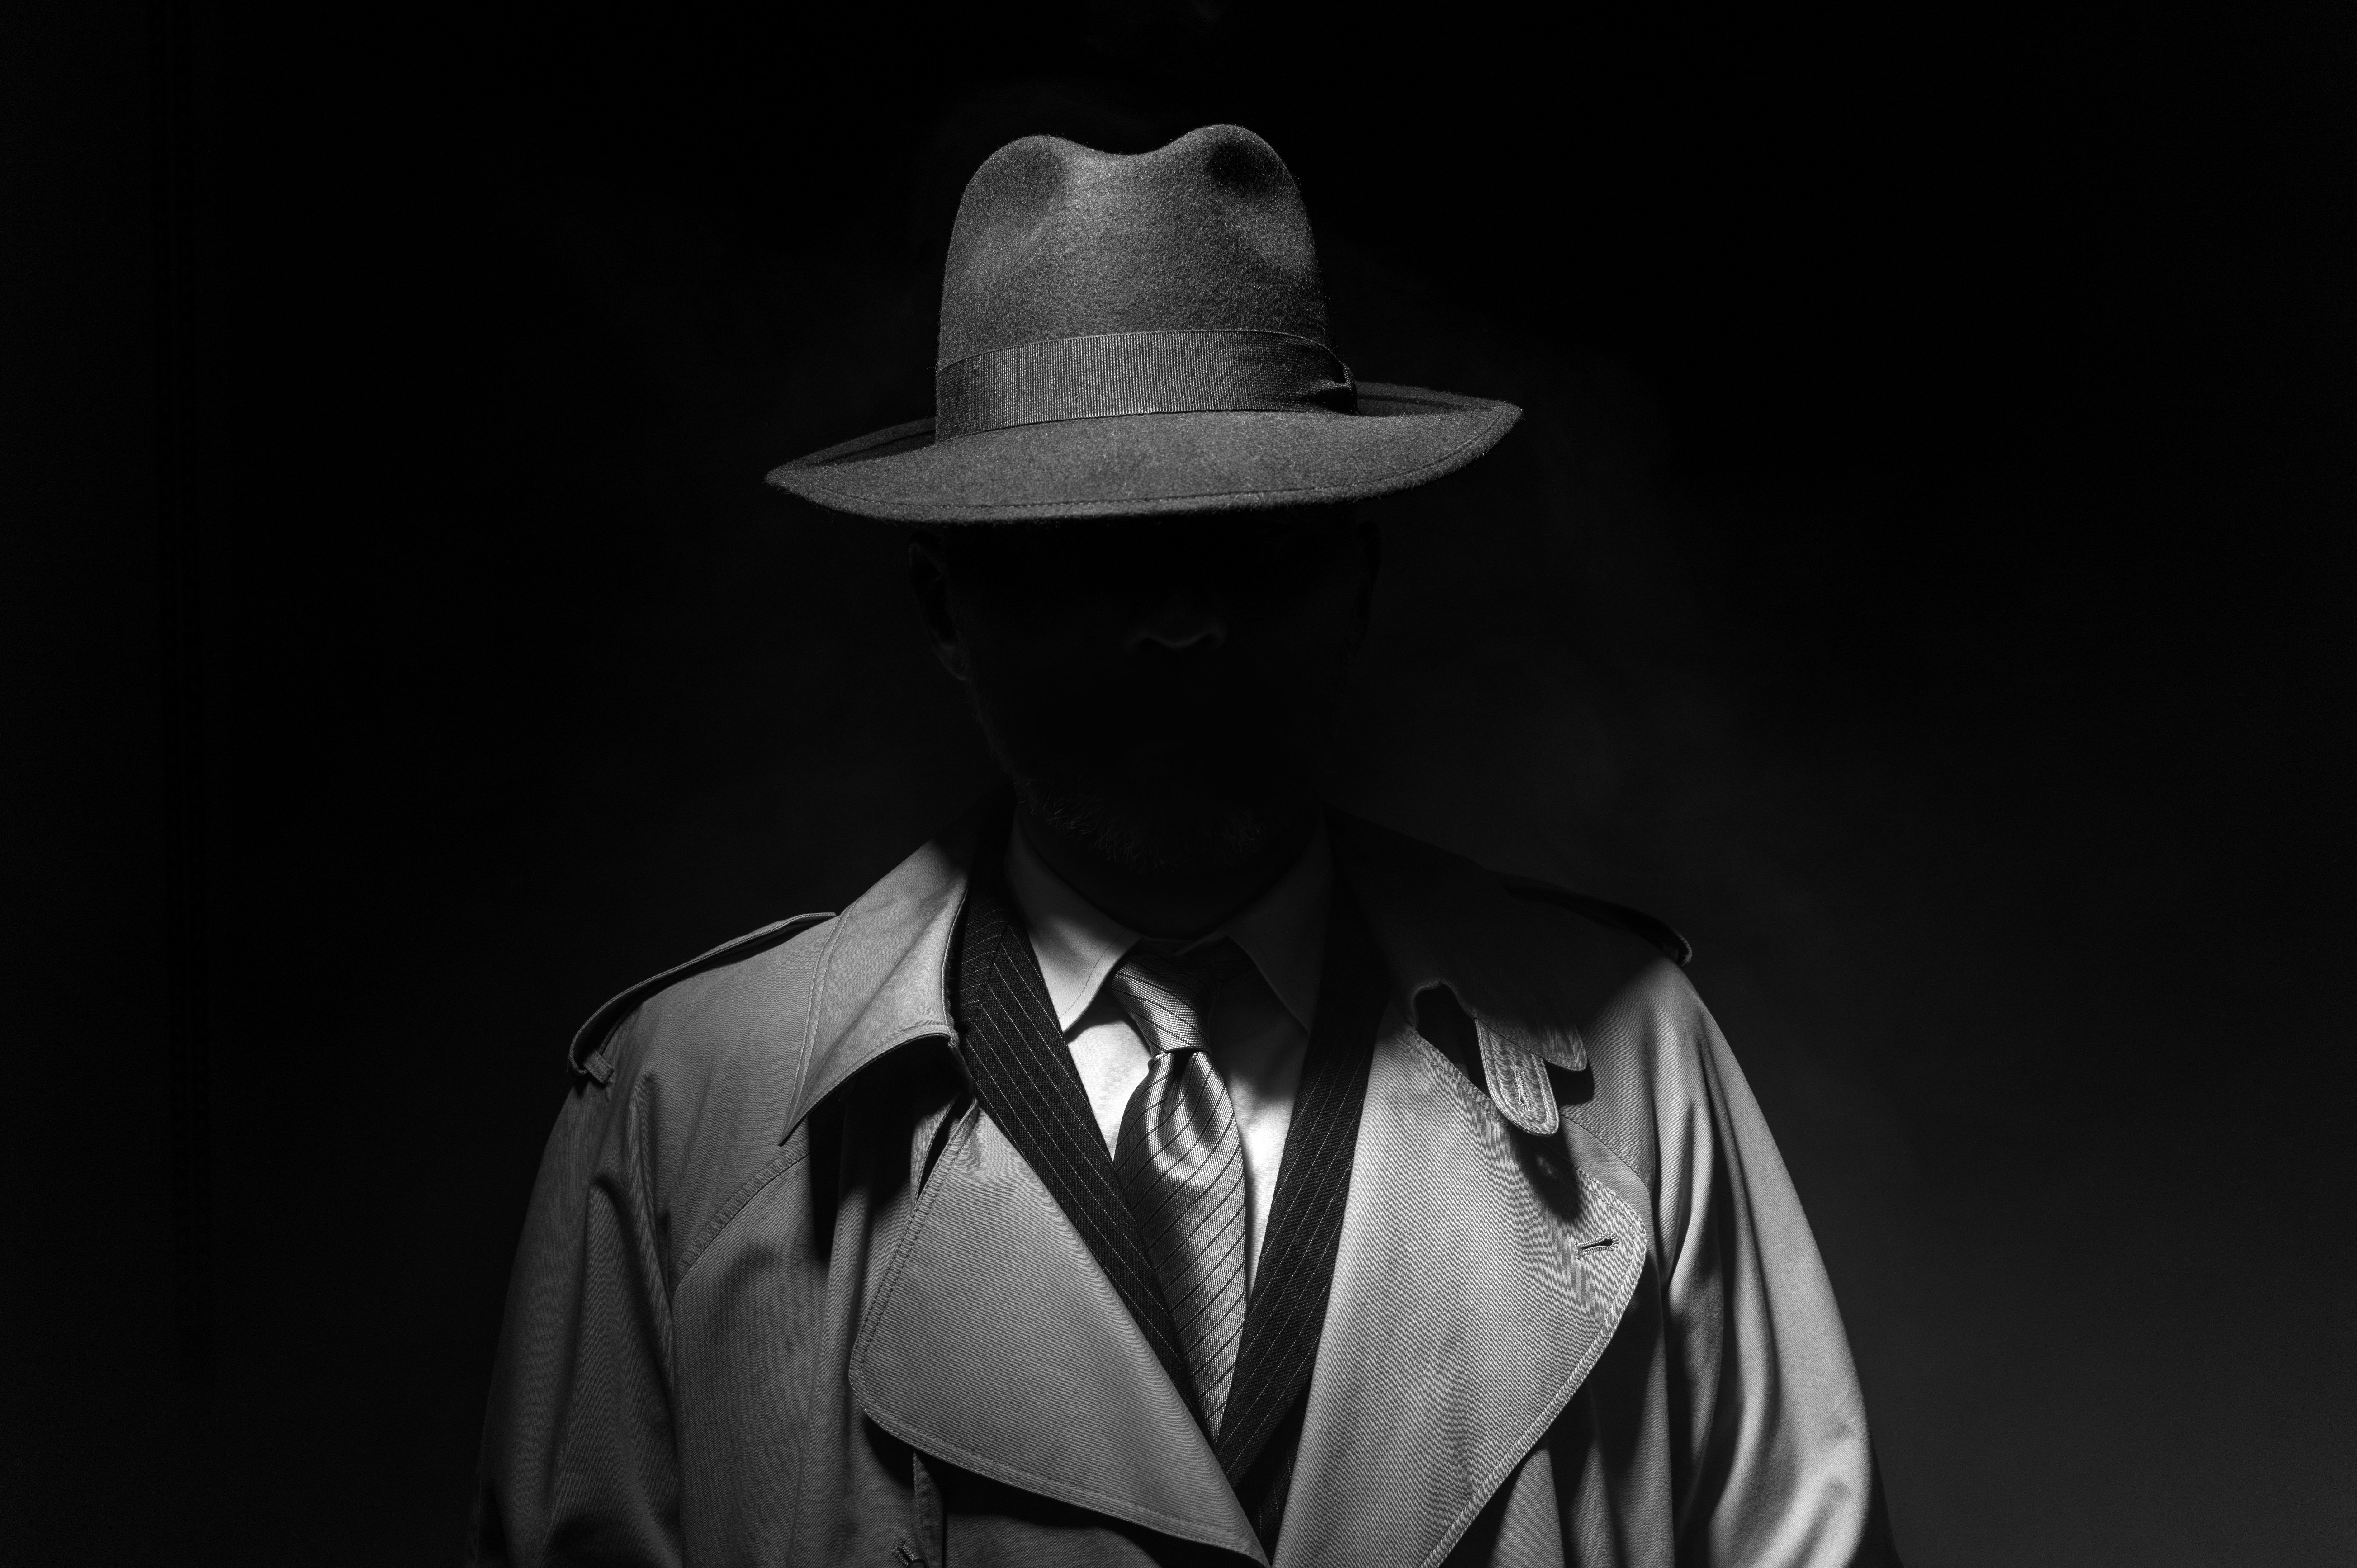 A detective standing in the shadows. │Source: Shutterstock